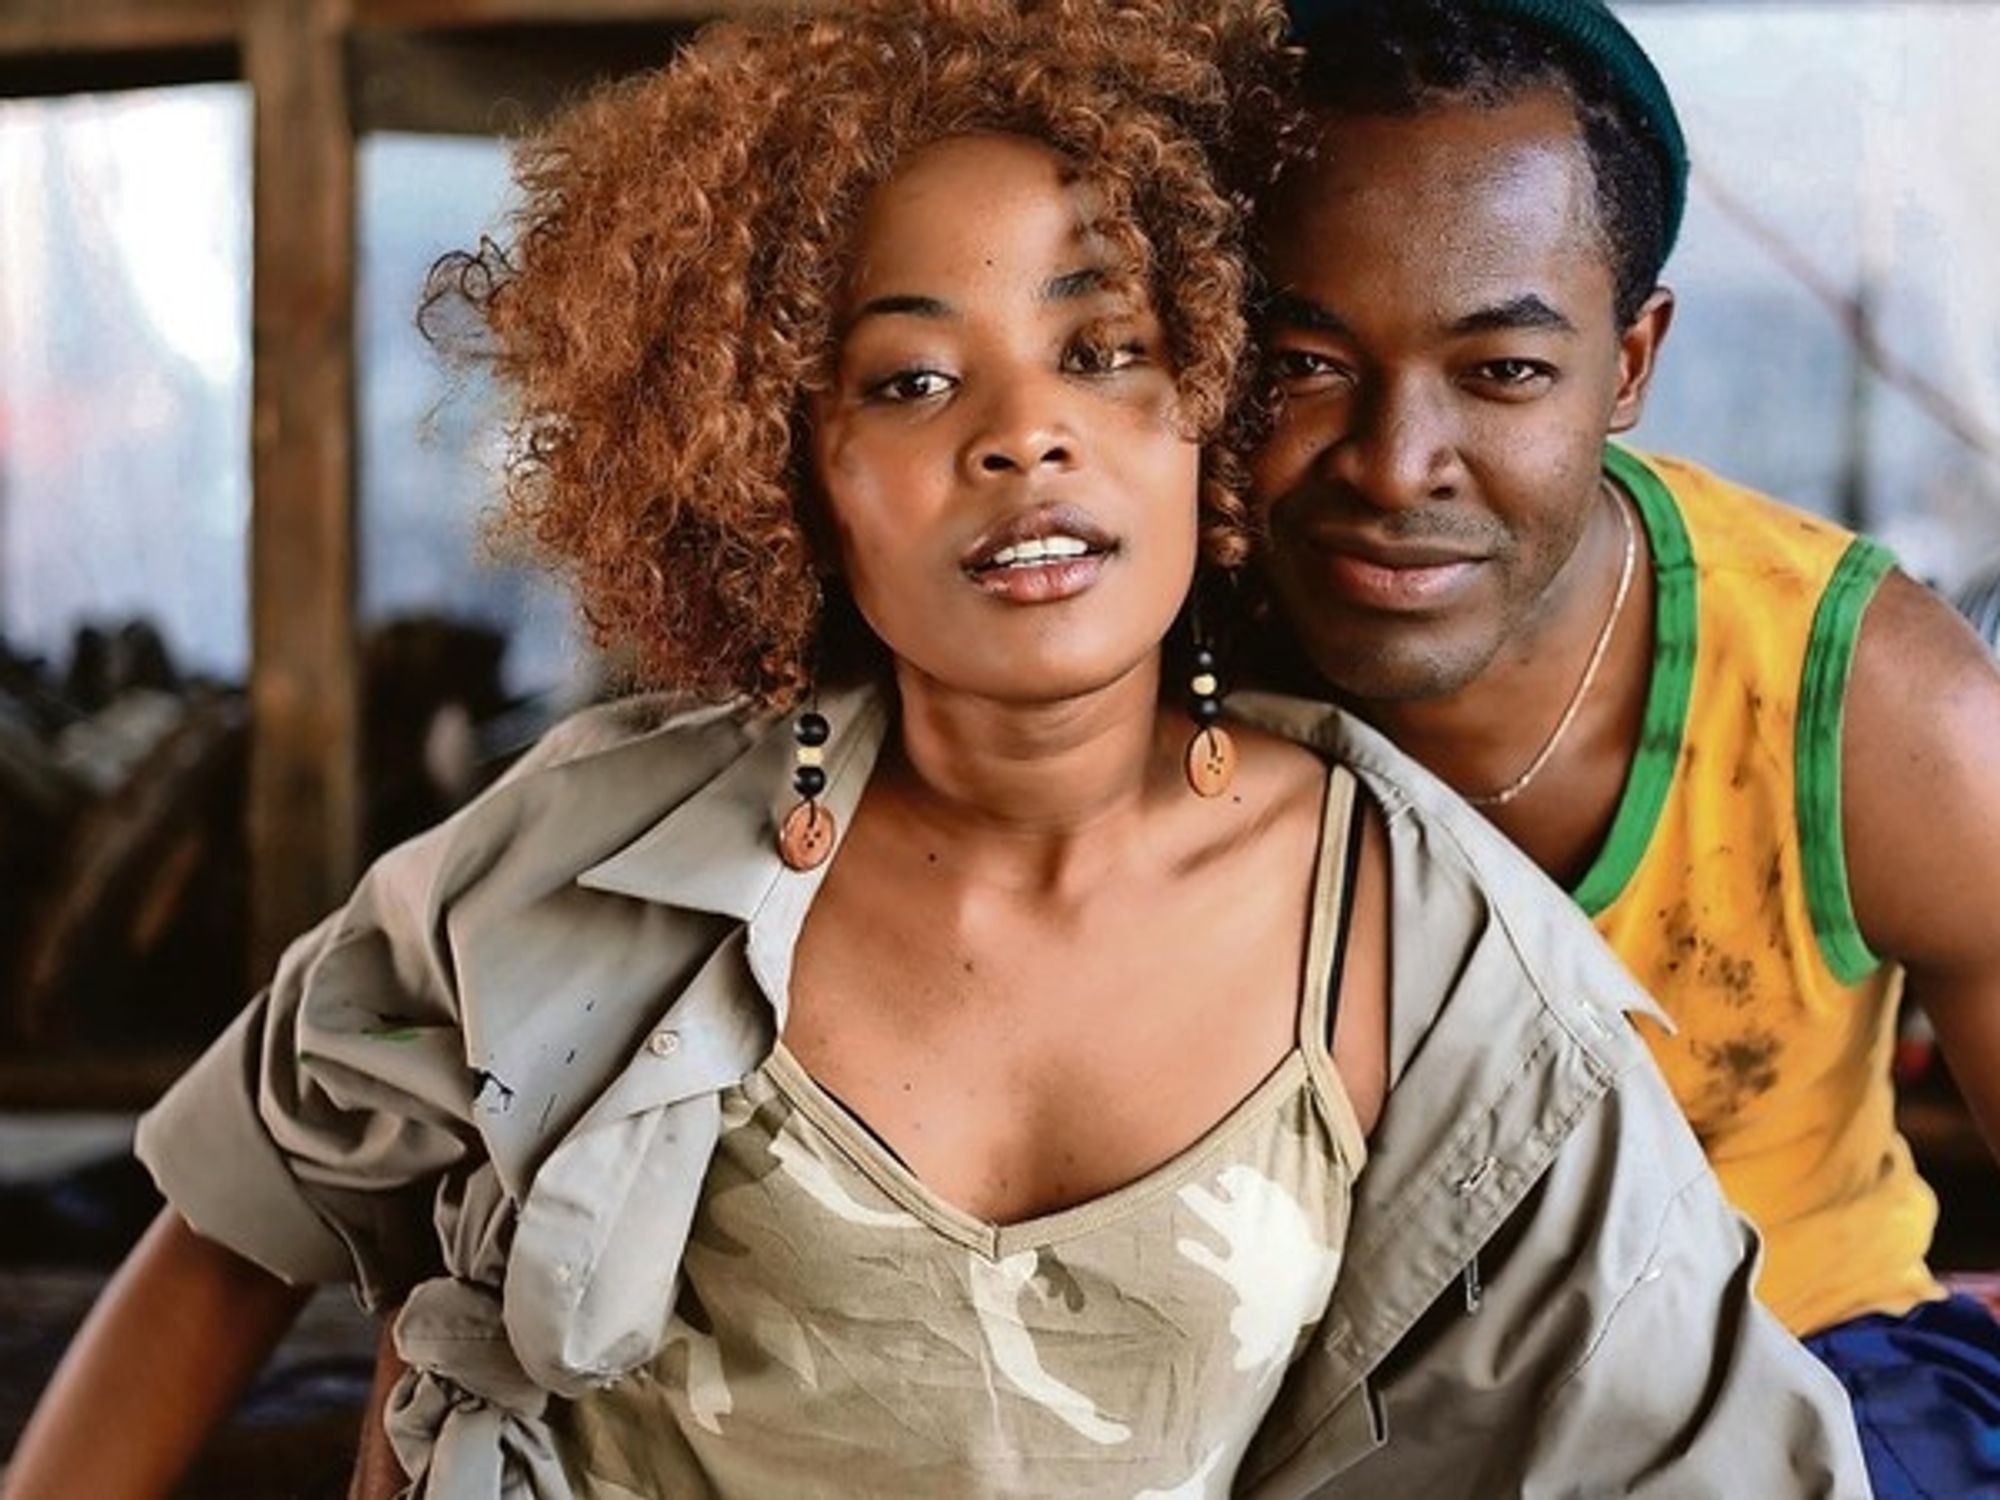 Watch the stars of Ayanda in lockdown ​streaming live on Vimeo.